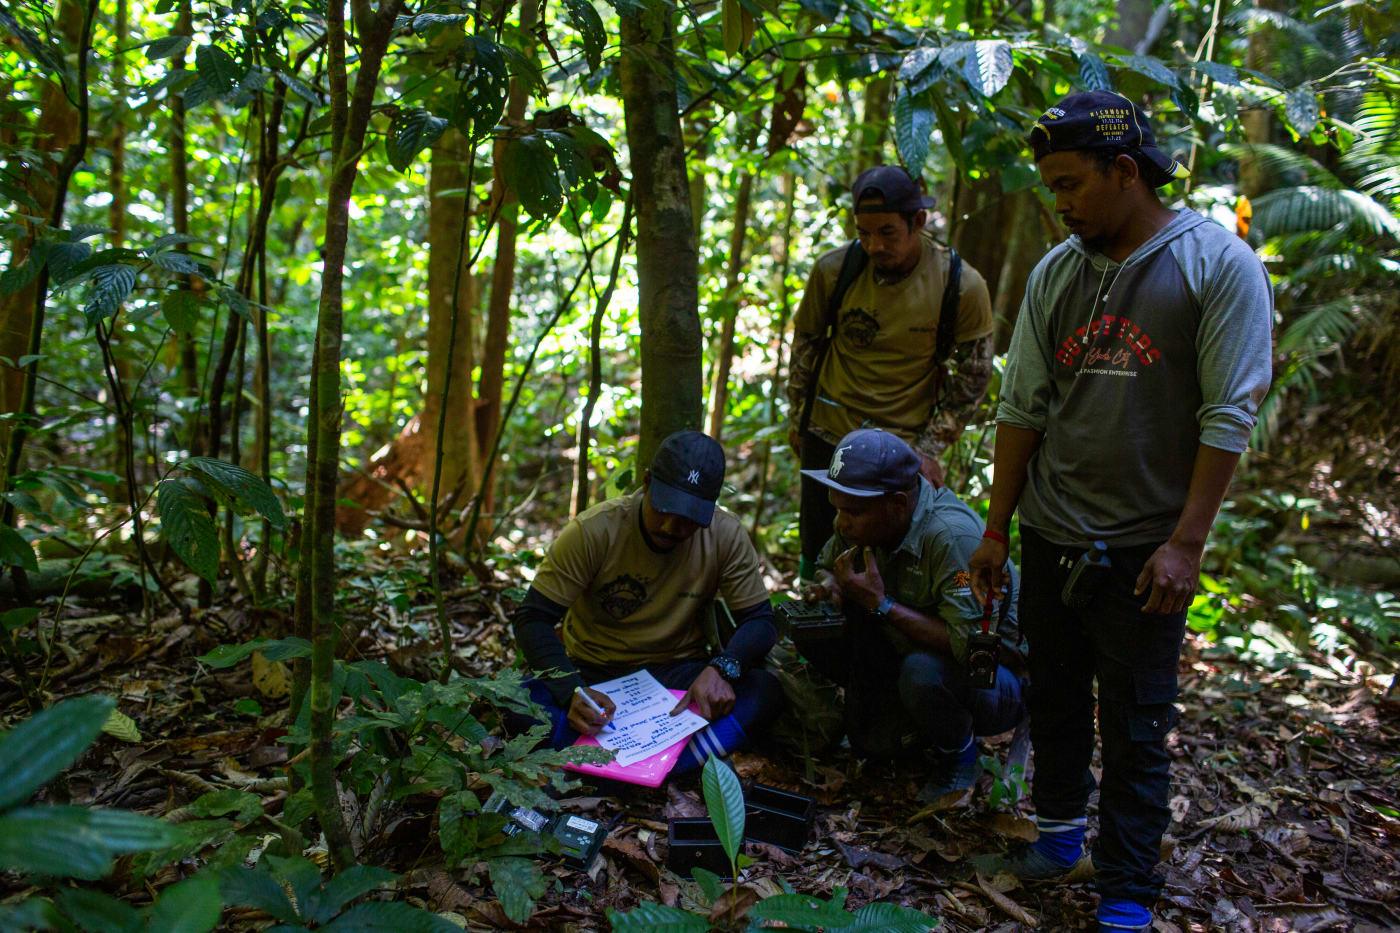 Four members of the patrol team logs data while surrounded by rainforest.